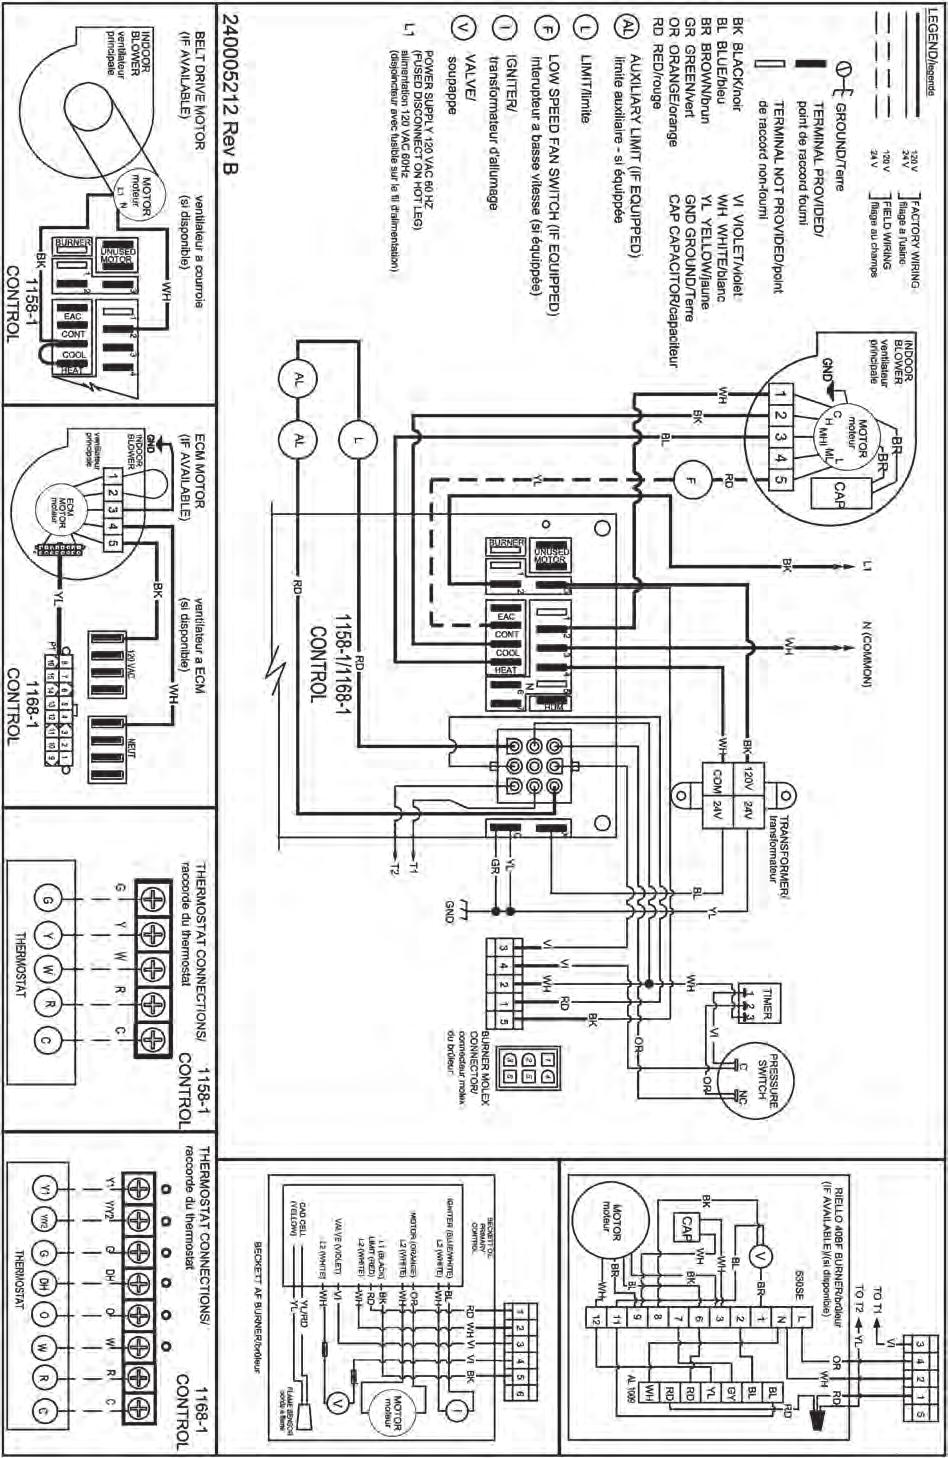 DIRECT VENTING wiring diagram -BML AND HML WITH FAN TIMER CONTROL